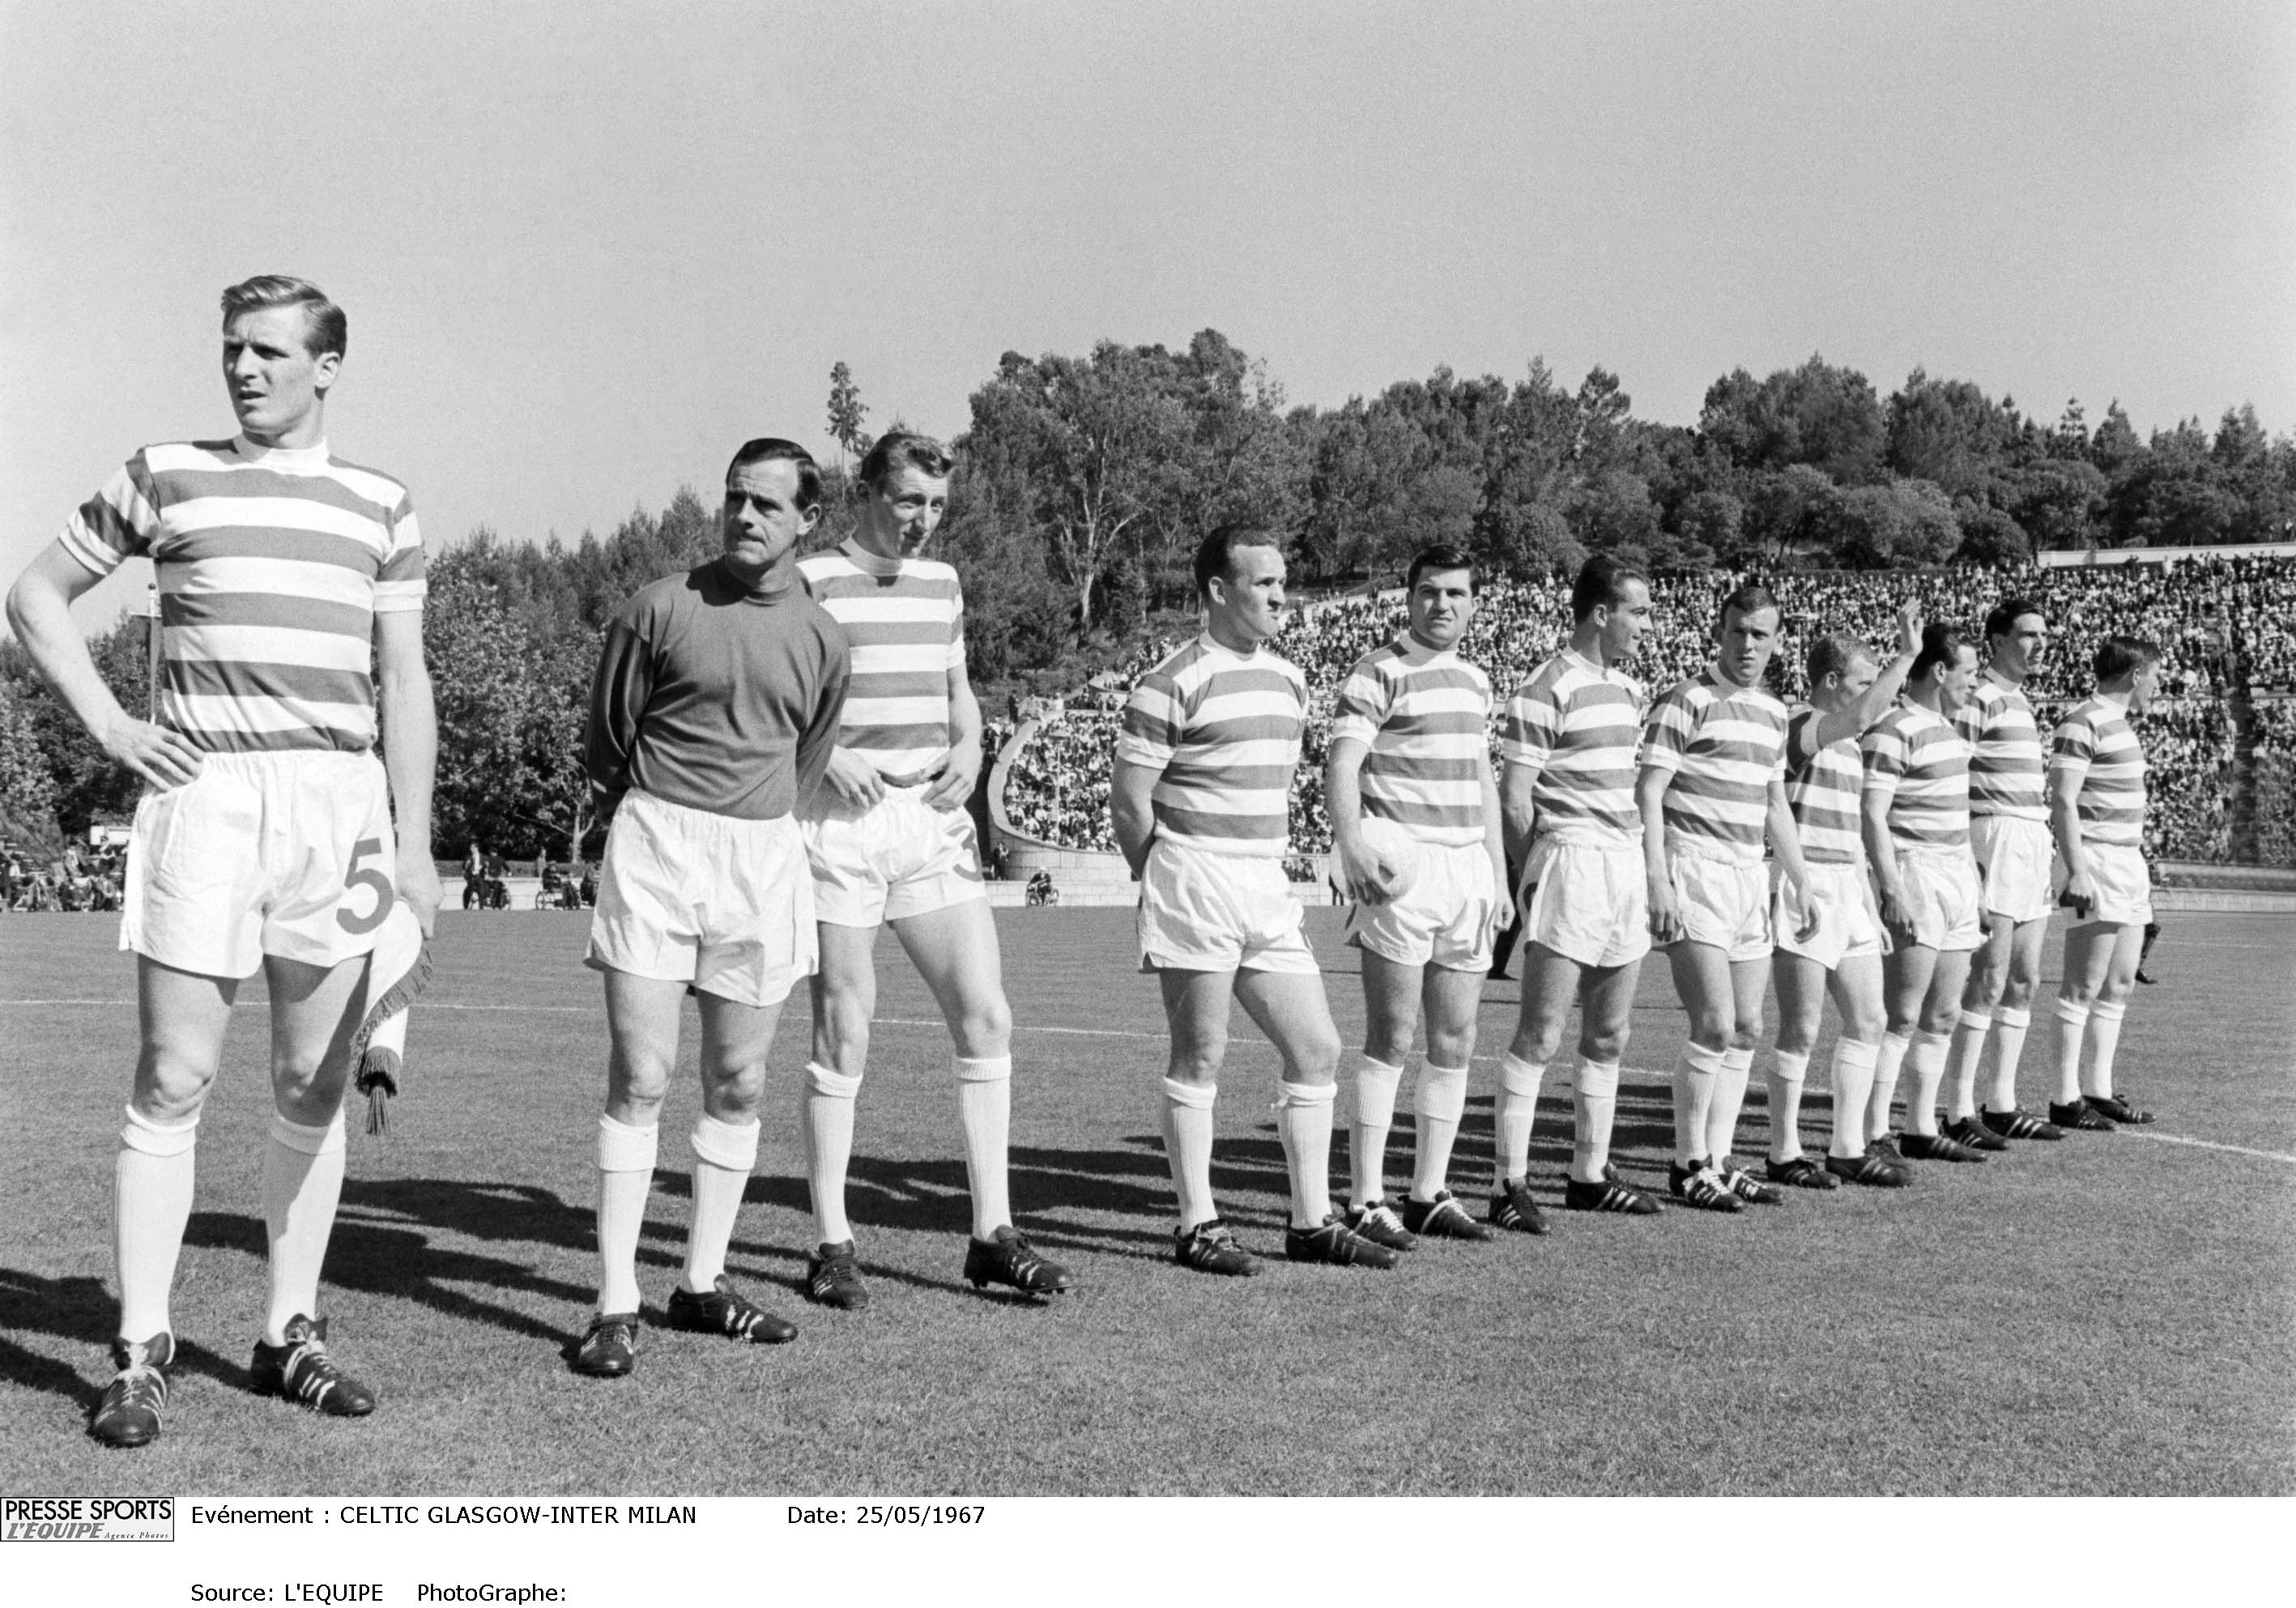 Glasgow Celtic Champions 😁 9 in a row - Lisbon Lions 1967